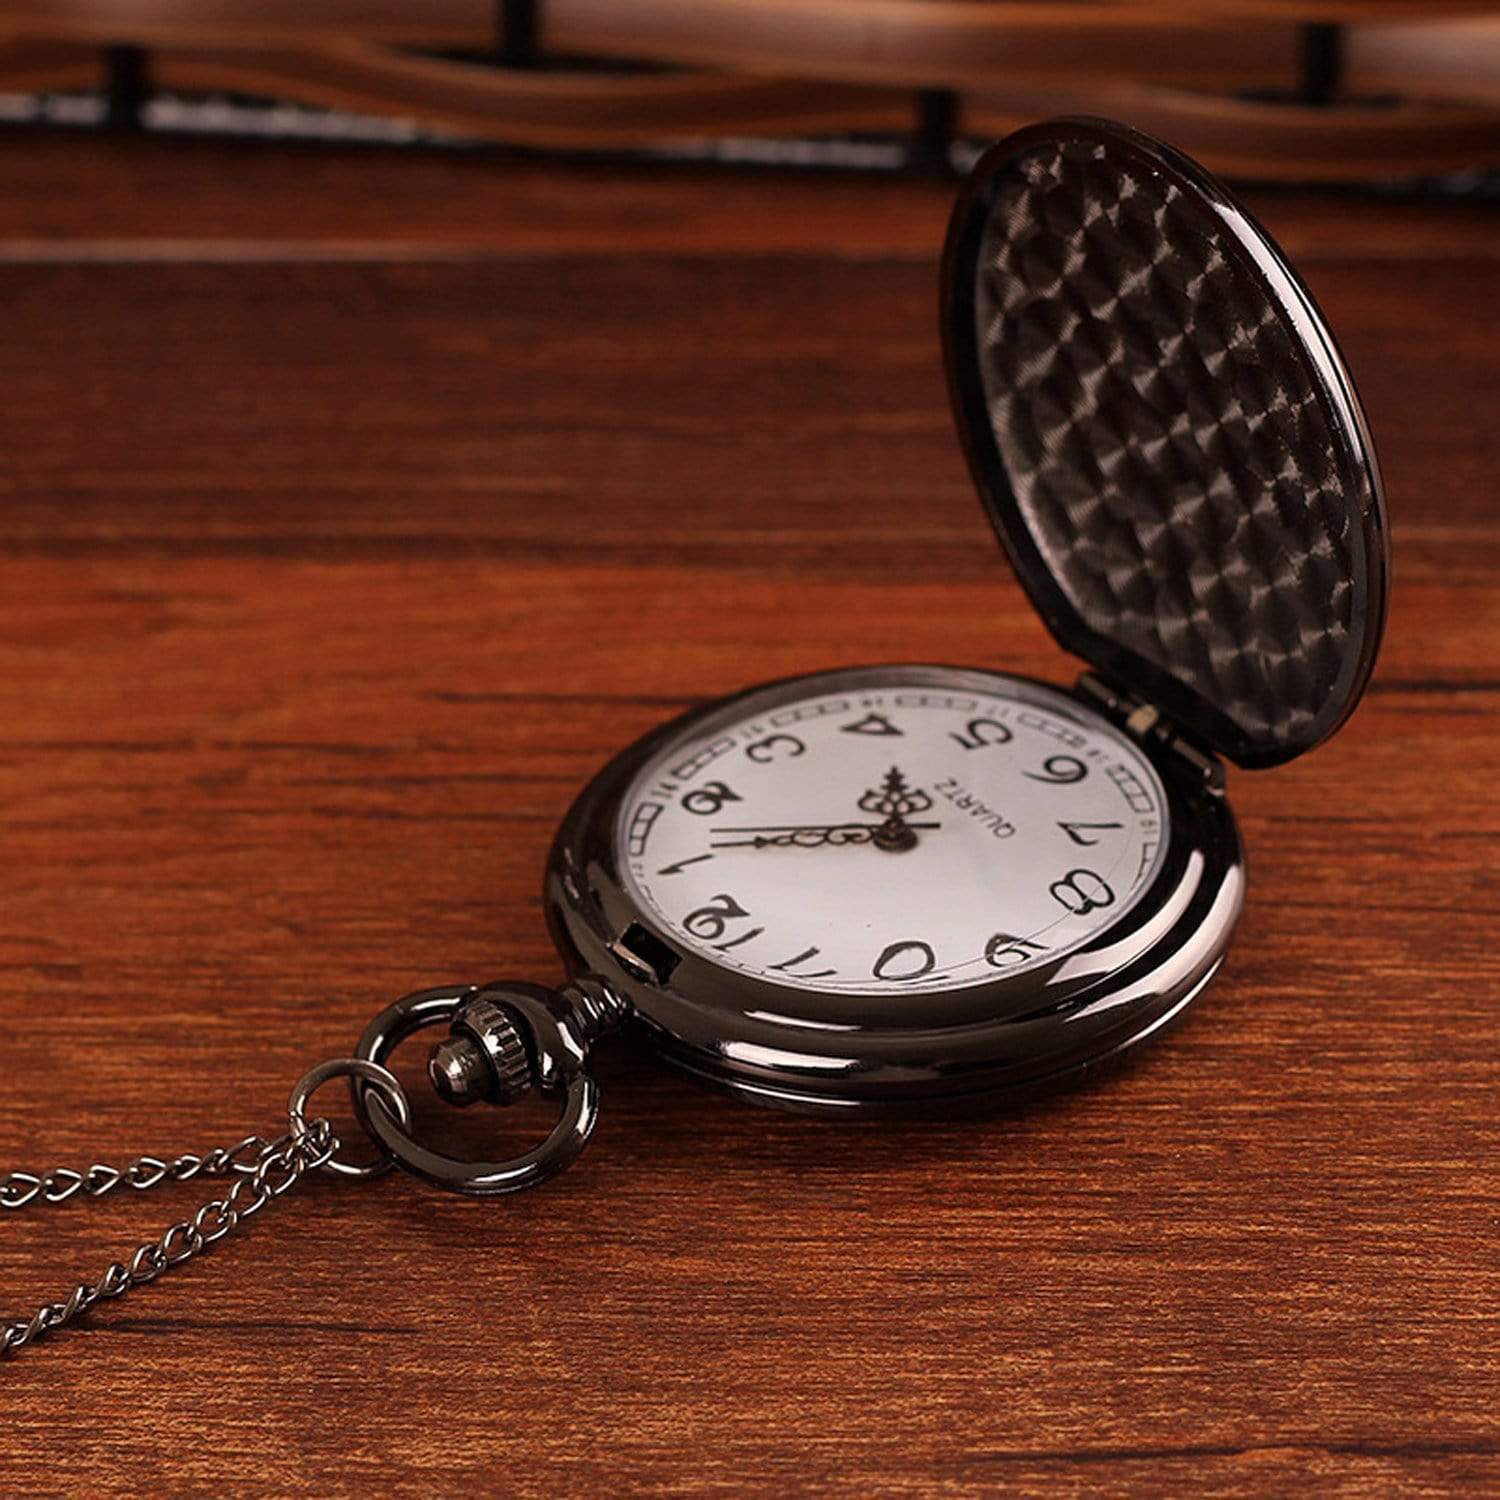 Pocket Watches Dad To Son - The Delight Of My Life Pocket Watch GiveMe-Gifts